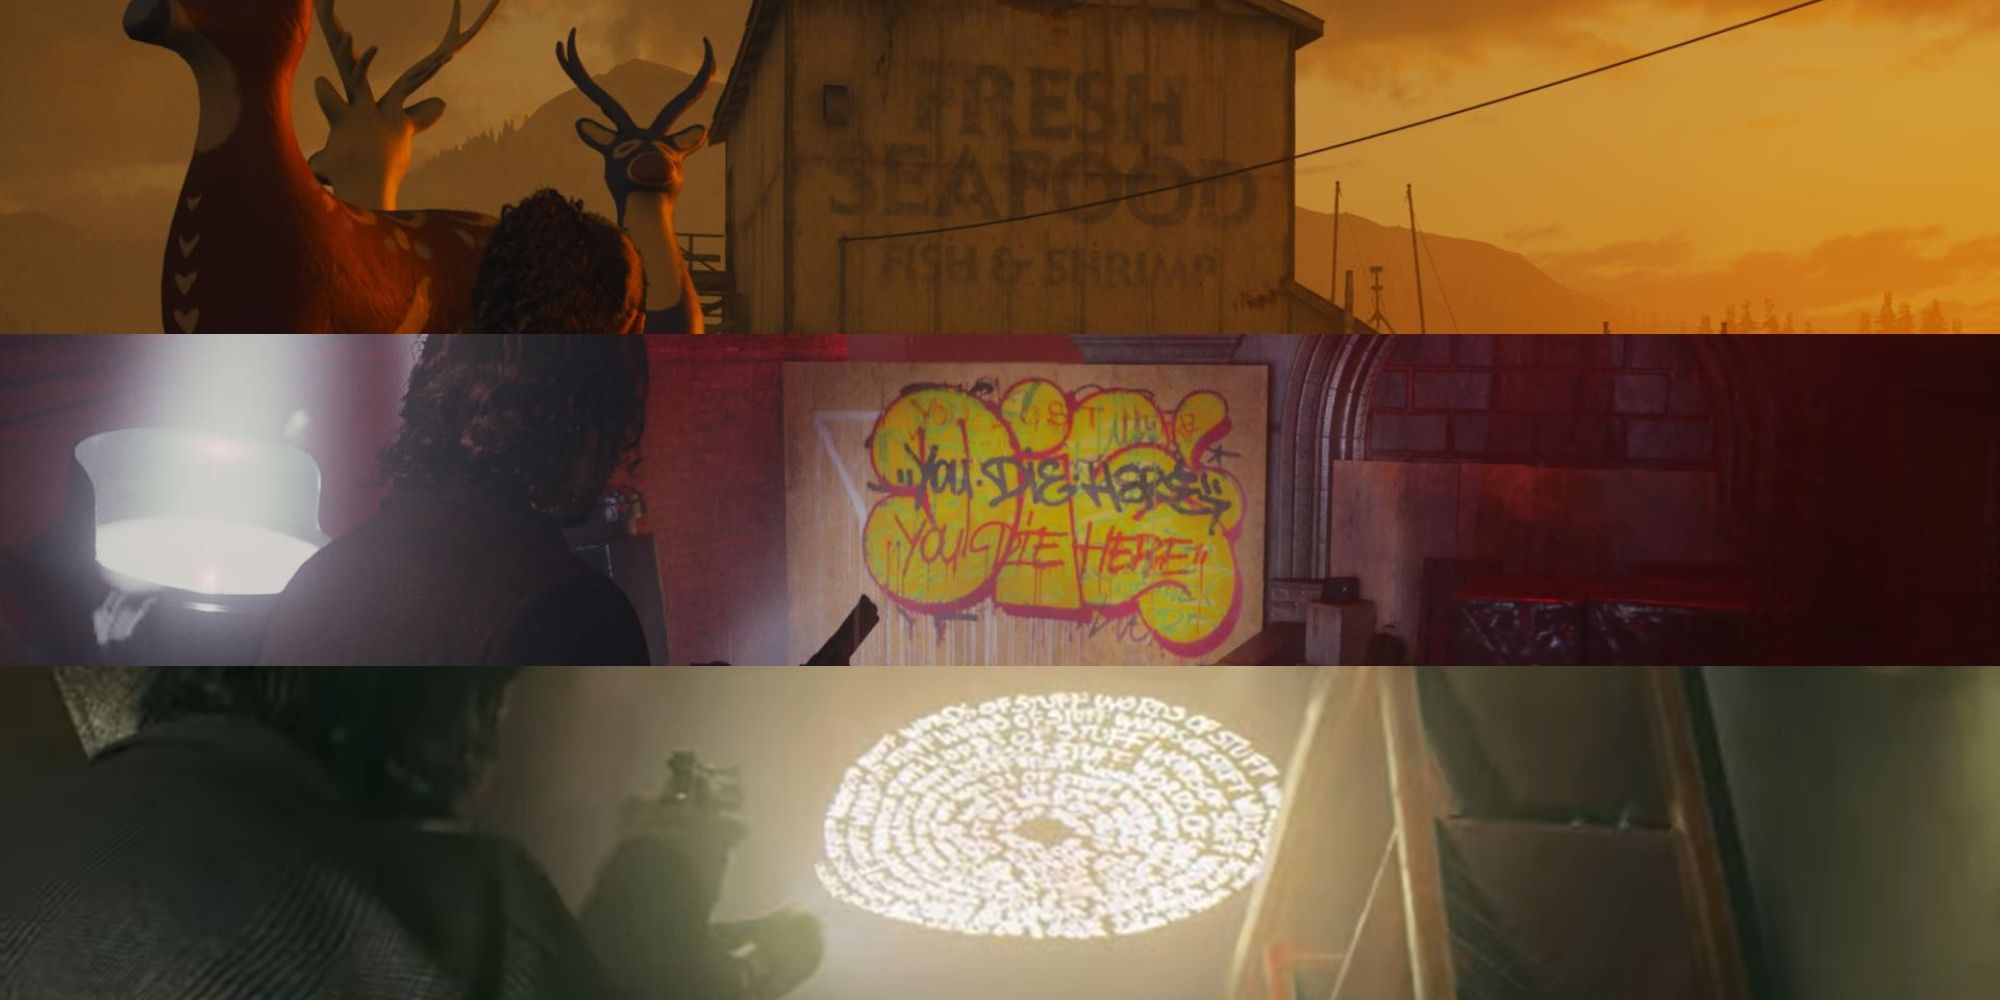 Three images horizontally split. The top image displays a Fresh Seafood Building in Brightfalls. The middle image displays graffiti on the wall on the roof of Poet's Cinema. The bottom image displays Words of Stuff on the ceiling of the bar inside Oceanview Hotel.